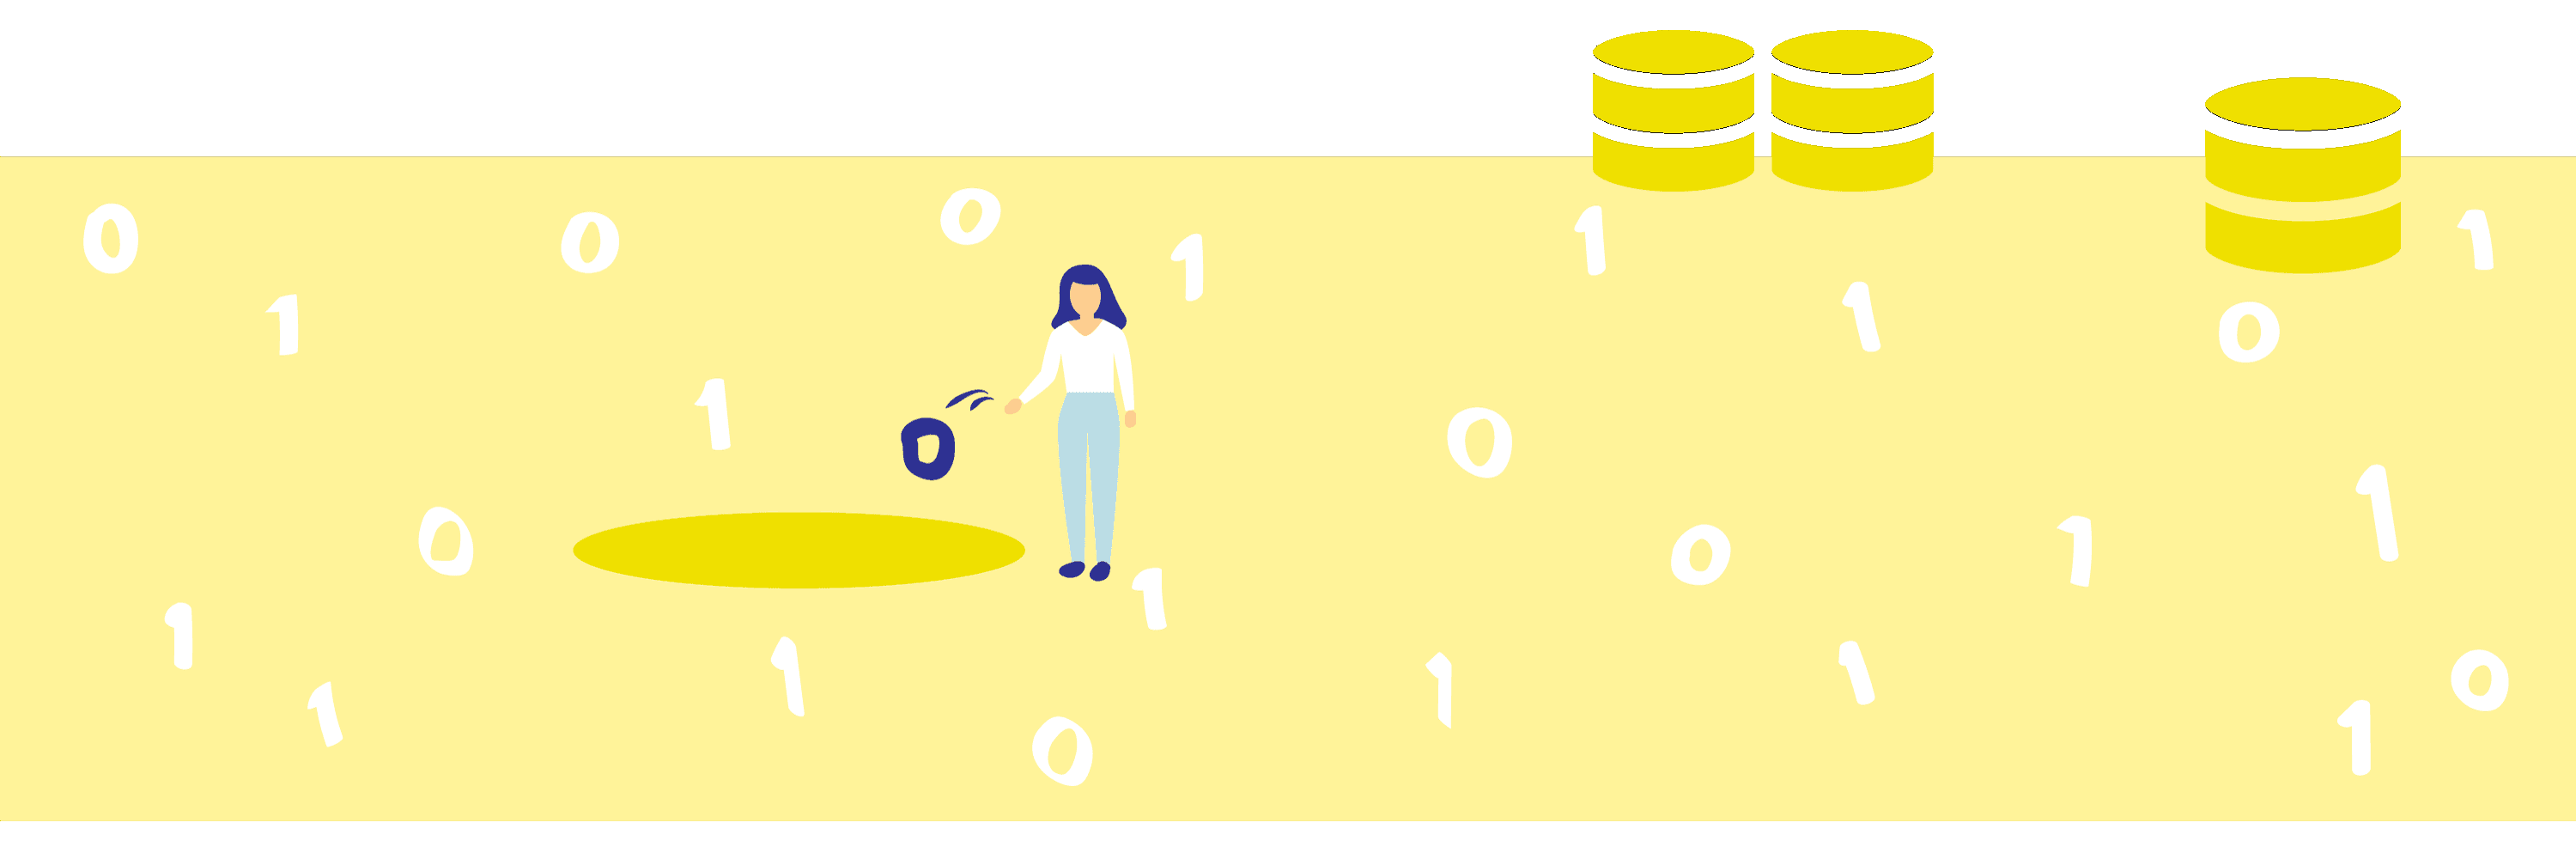 Illustration of woman throwing a piece of computer code into a hole